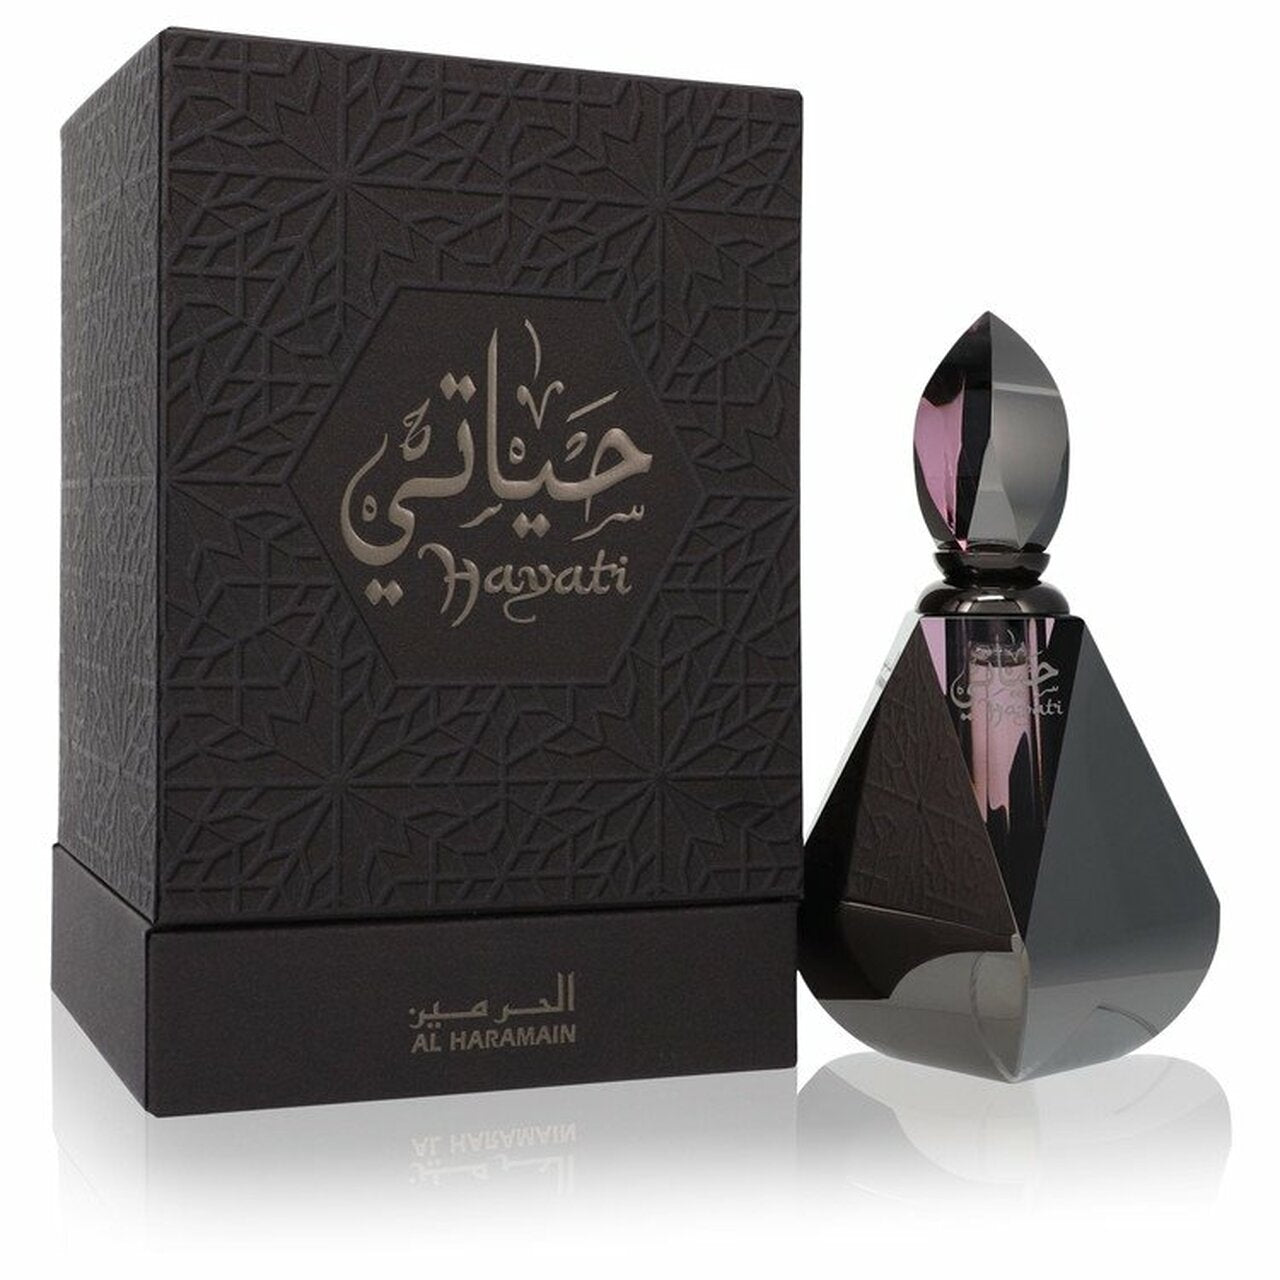 <meta charset="UTF-8">Hayati by Al Haramain Perfumes is a Amber Floral fragrance for women and men. The nose behind this fragrance is Christian Carbonnel. Top notes are Musk and Amber; middle notes are Musk, Rose and Sugar; base notes are Musk, Agarwood (Oud) and Woody Notes.